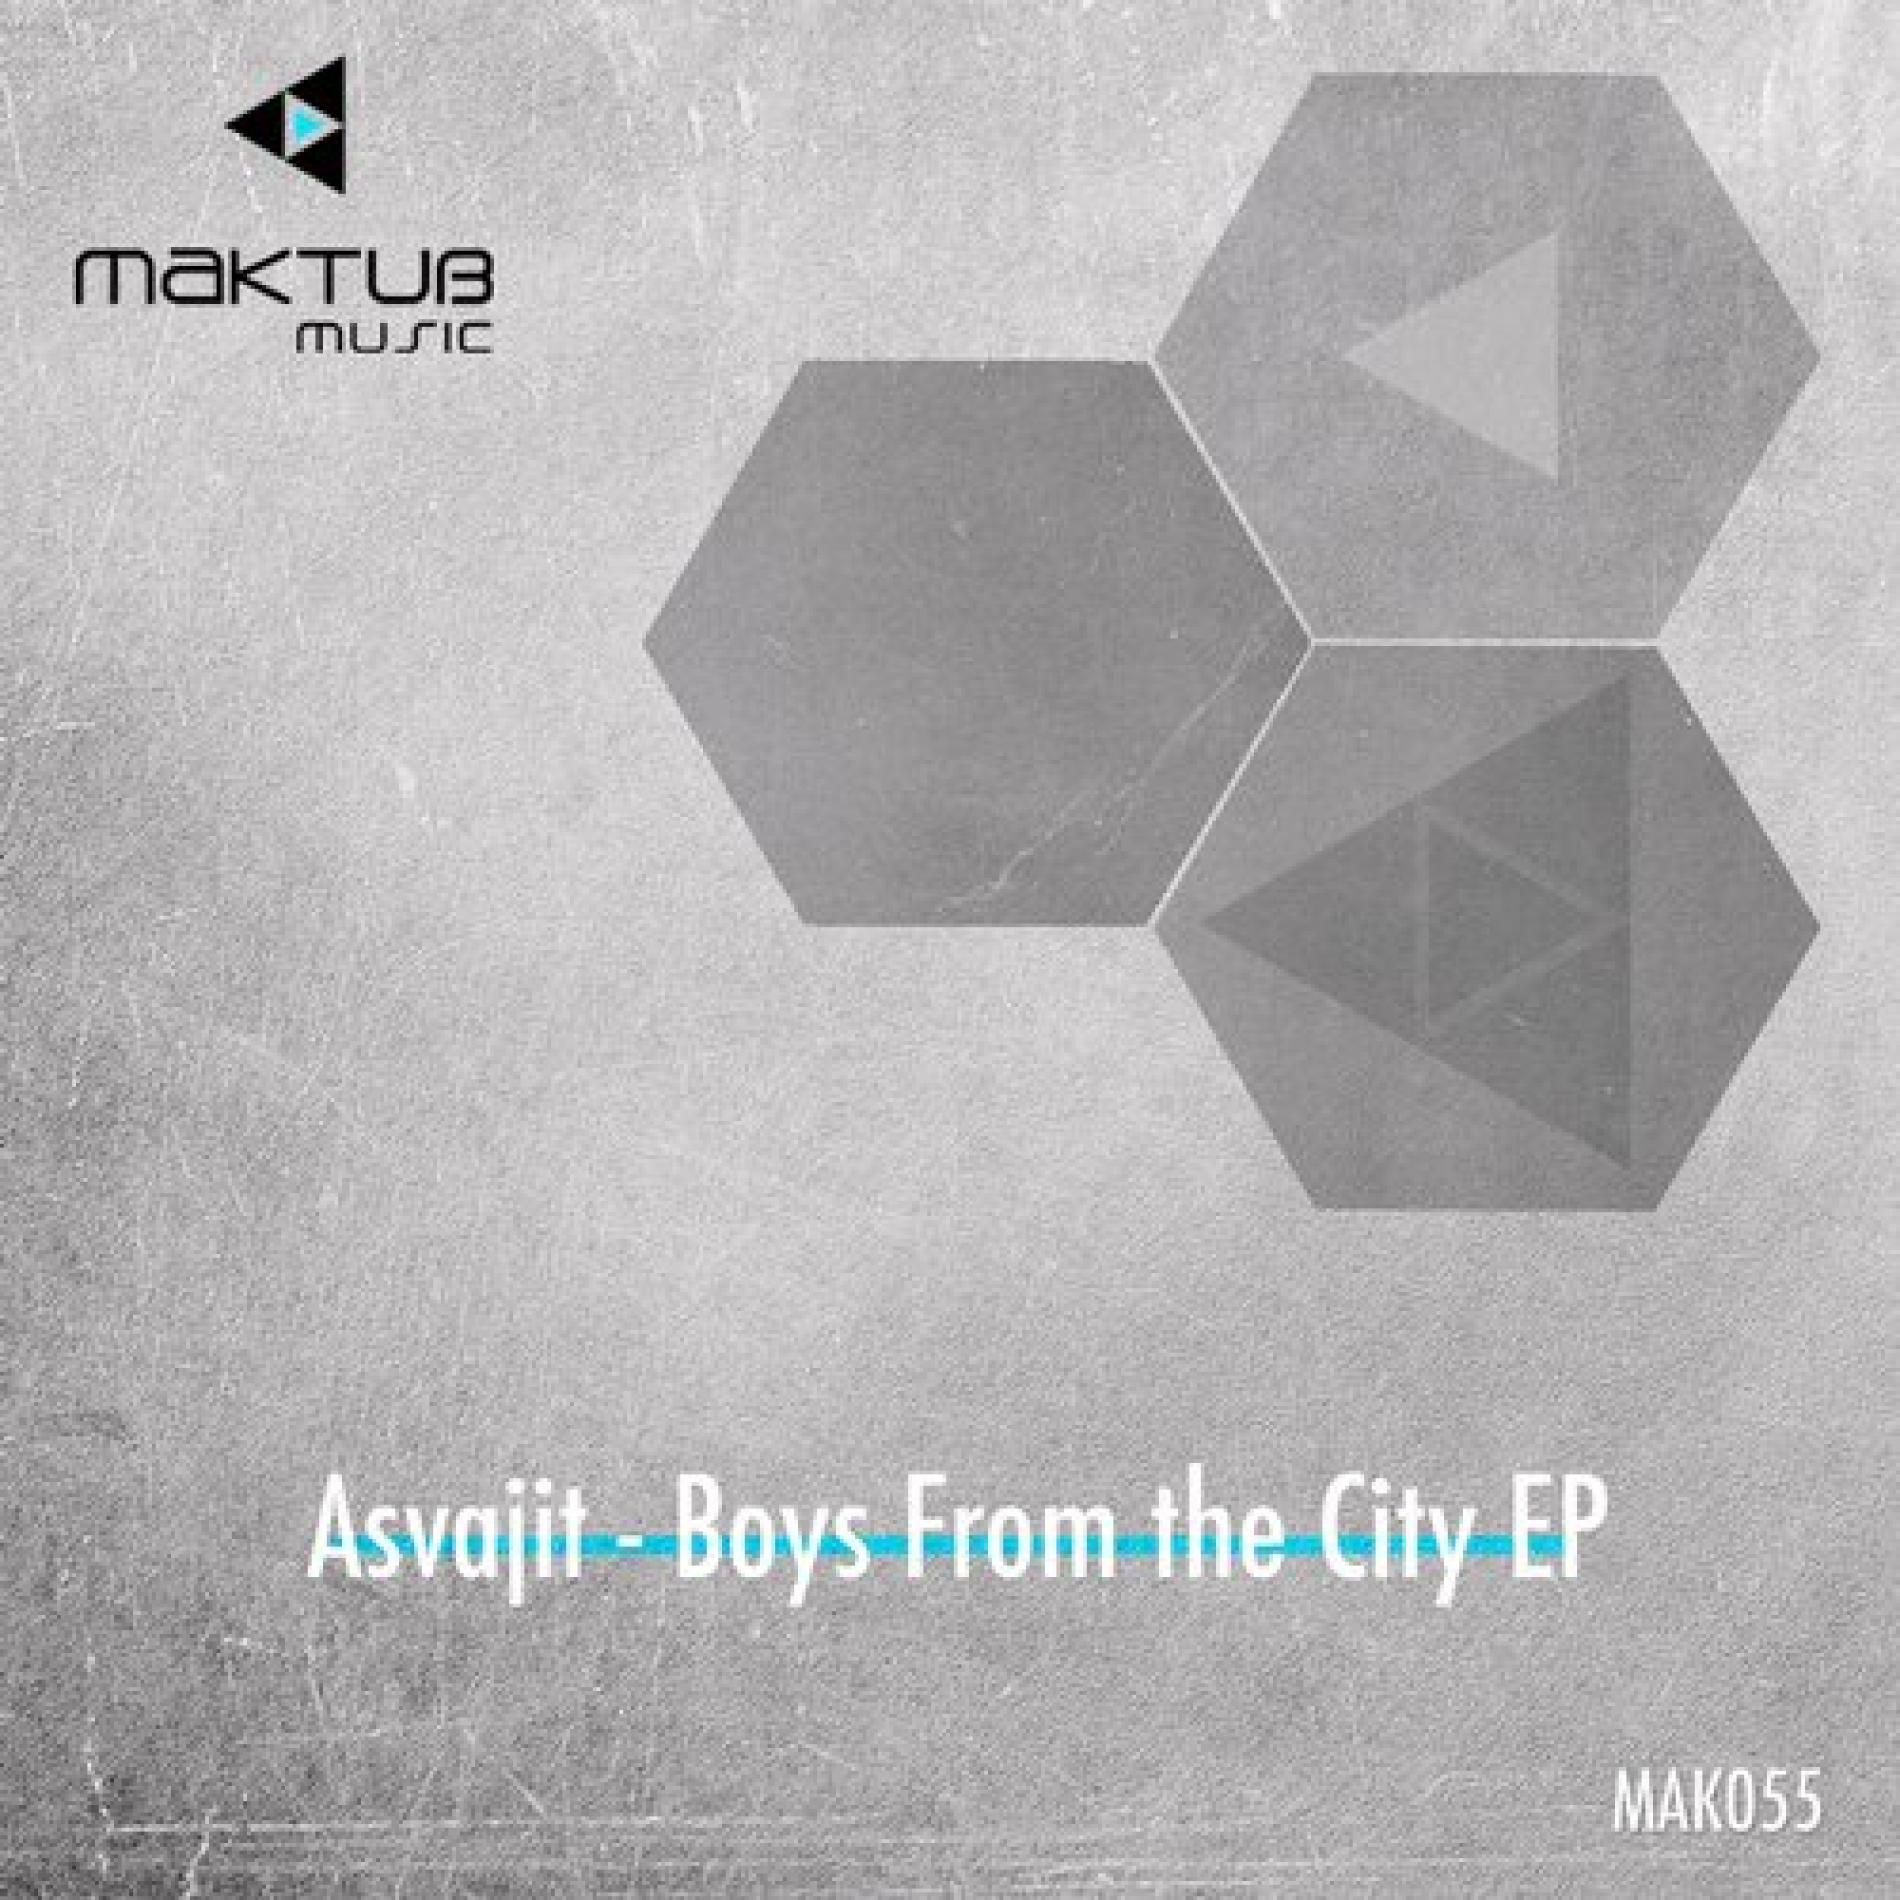 Asvajit Releases A New Ep